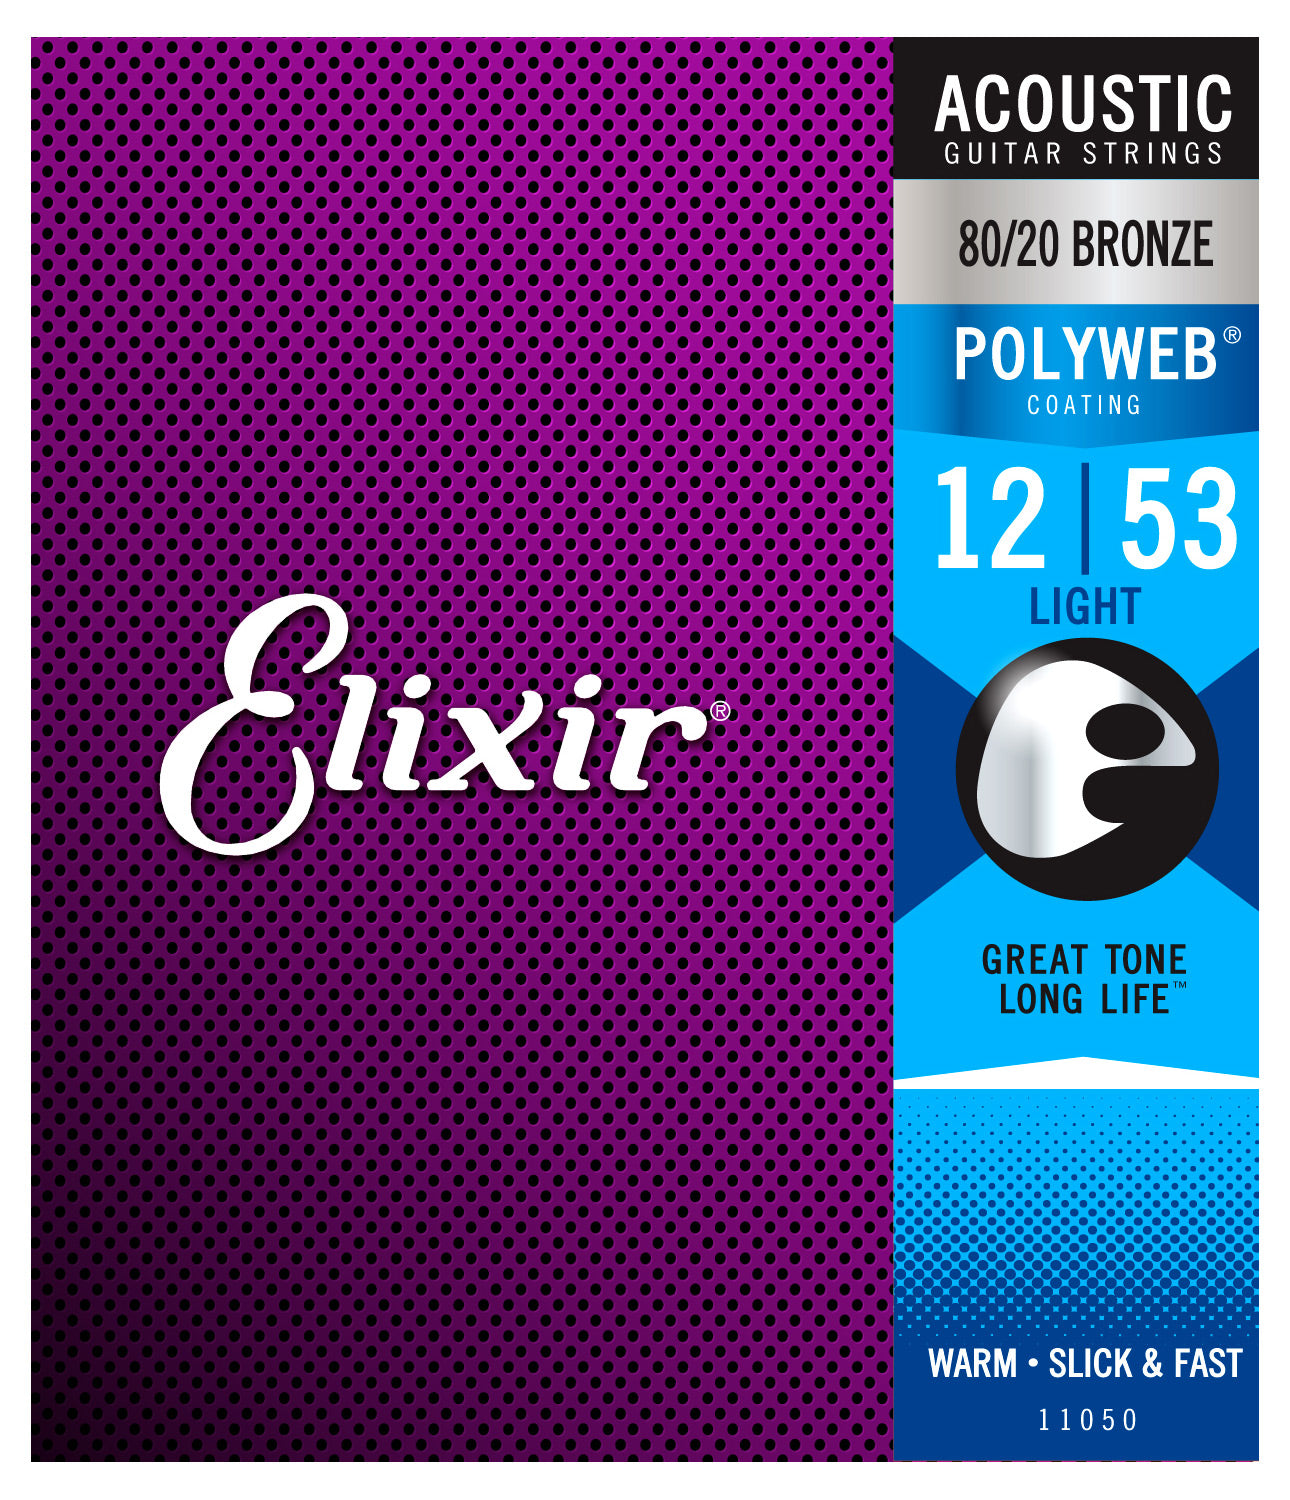 Elixir 80/20 Bronze Acoustic Guitar Strings with POLYWEB